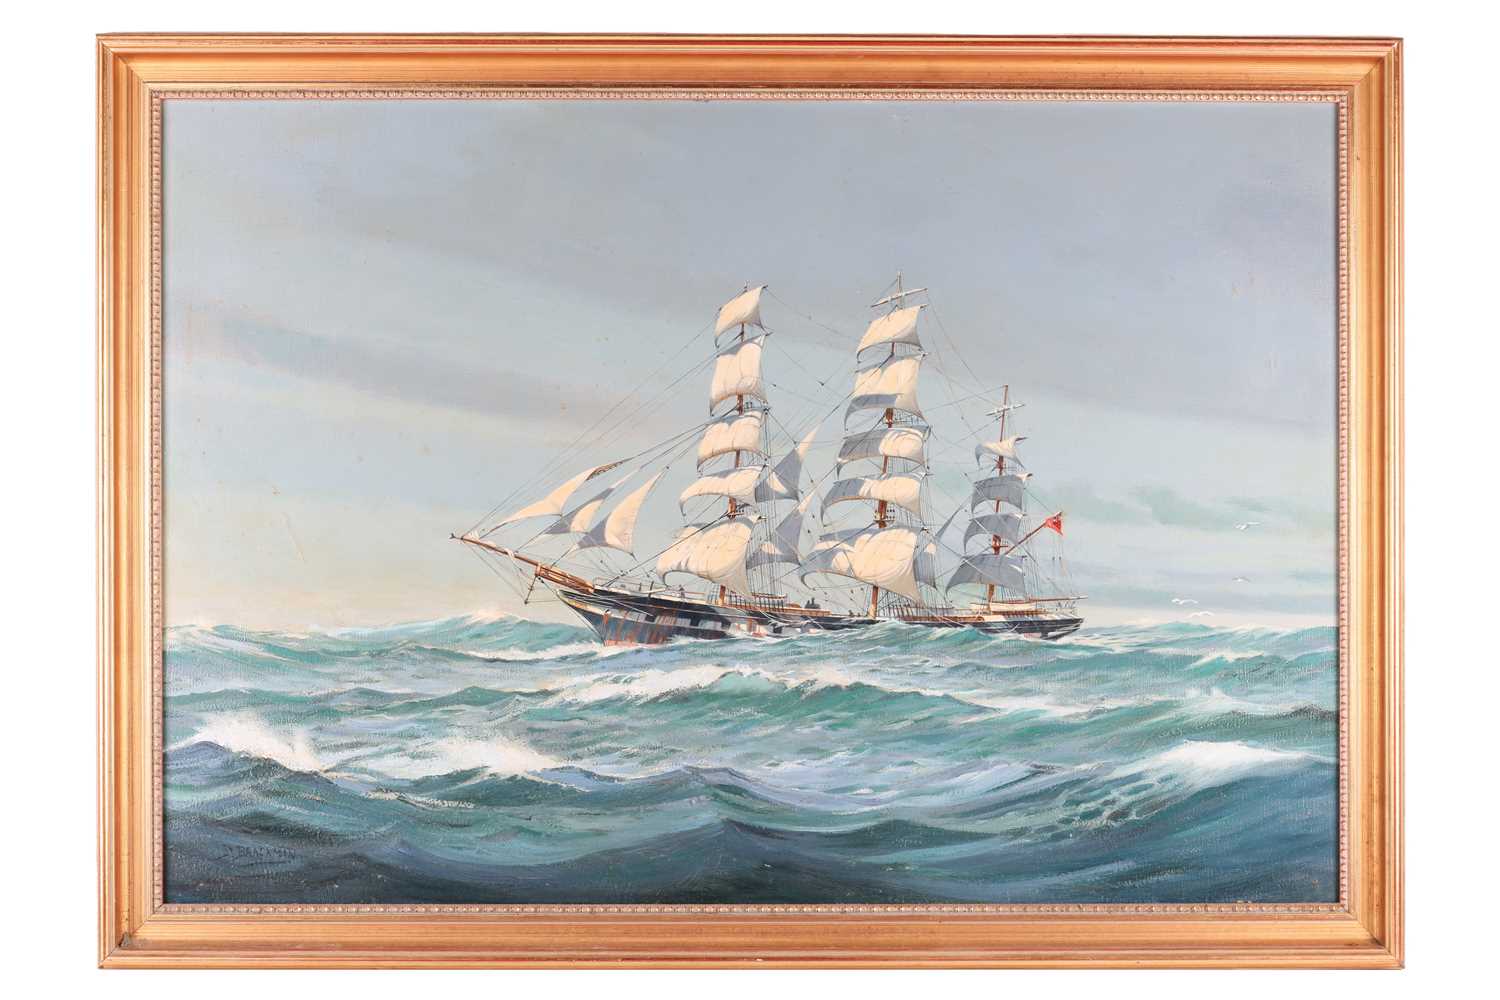 David Brackman (1932-2008), a three-masted sailing ship at sea, oil on canvas, signed to lower left 